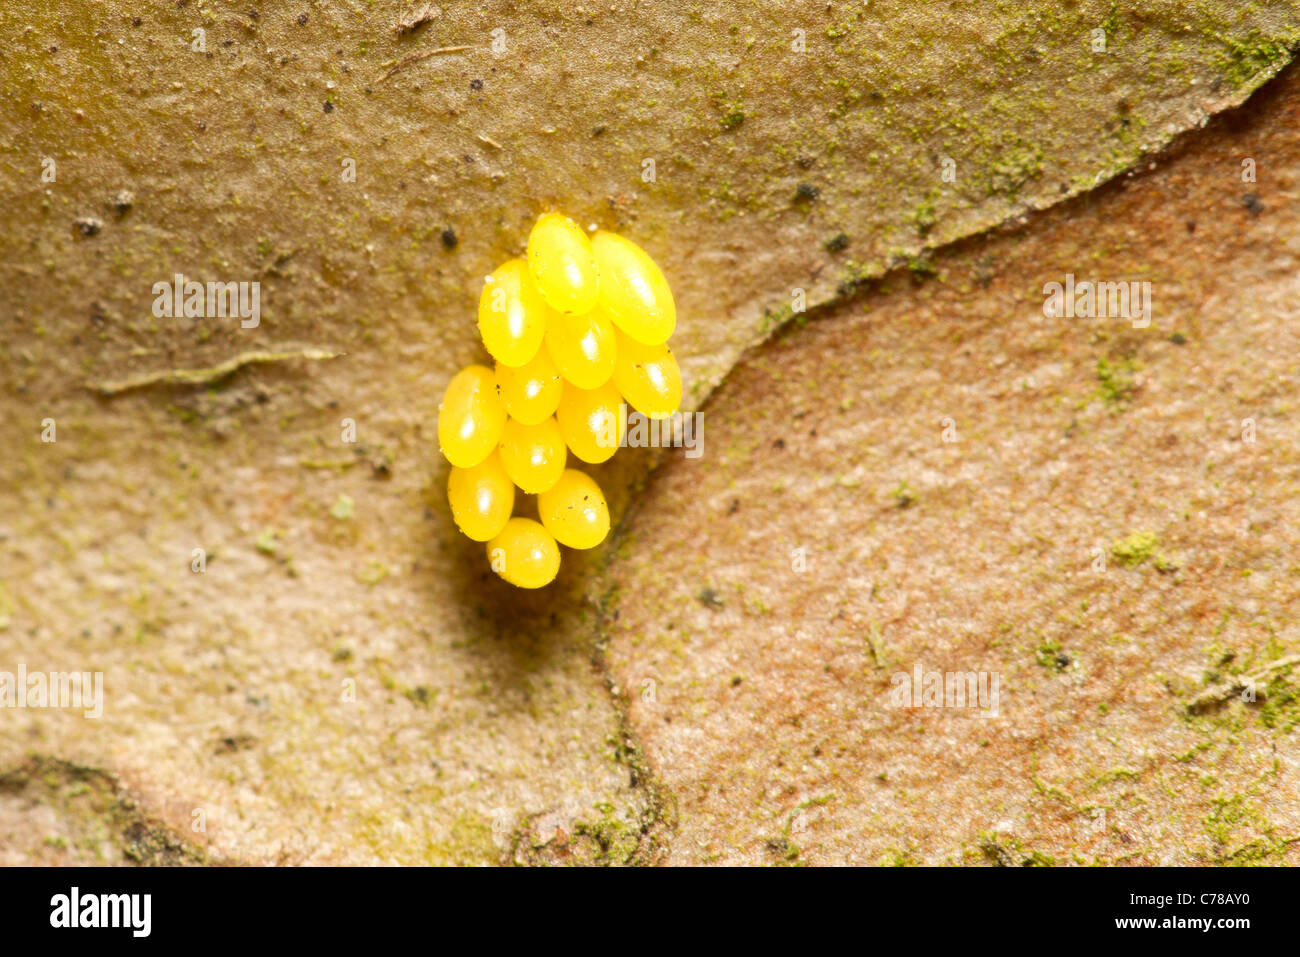 Cluster Of Yellow Insect Eggs Probably The Caelifera Grasshopper Suborder Attached On A Tree Stock Photo